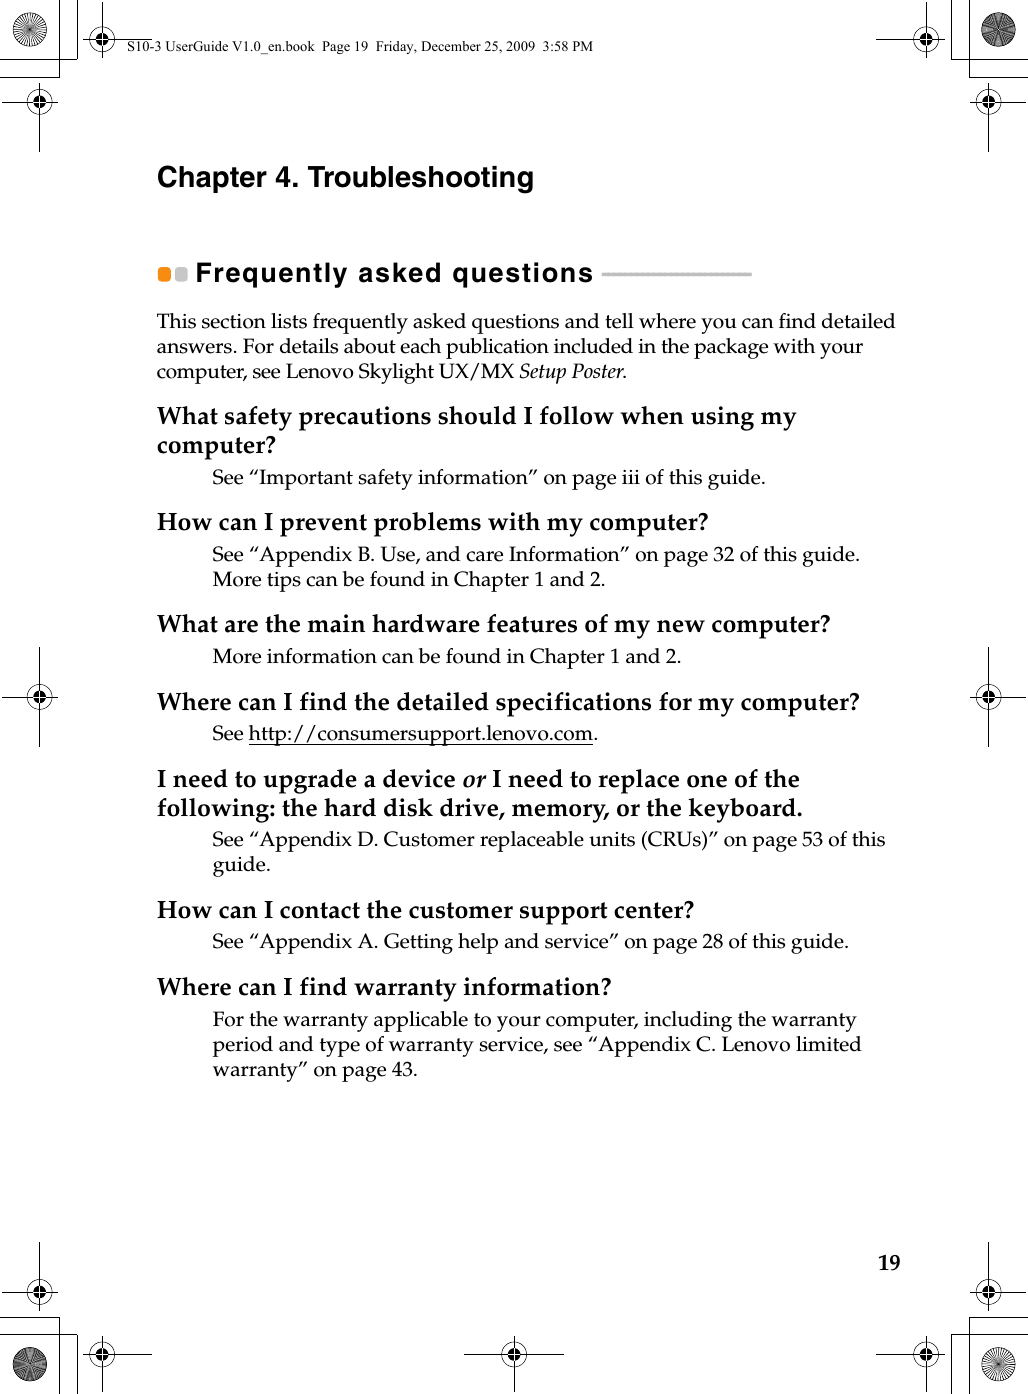 19Chapter 4. TroubleshootingFrequently asked questions  - - - - - - - - - - - - - - - - - - - - - - - - - -This section lists frequently asked questions and tell where you can find detailed answers. For details about each publication included in the package with your computer, see Lenovo Skylight UX/MX Setup Poster. What safety precautions should I follow when using my computer?See “Important safety information” on page iii of this guide.How can I prevent problems with my computer?See “Appendix B. Use, and care Information” on page 32 of this guide. More tips can be found in Chapter 1 and 2.What are the main hardware features of my new computer?More information can be found in Chapter 1 and 2.Where can I find the detailed specifications for my computer?See http://consumersupport.lenovo.com.I need to upgrade a device or I need to replace one of the following: the hard disk drive, memory, or the keyboard.See “Appendix D. Customer replaceable units (CRUs)” on page 53 of this guide.How can I contact the customer support center?See “Appendix A. Getting help and service” on page 28 of this guide. Where can I find warranty information?For the warranty applicable to your computer, including the warranty period and type of warranty service, see “Appendix C. Lenovo limited warranty” on page 43.S10-3 UserGuide V1.0_en.book  Page 19  Friday, December 25, 2009  3:58 PM